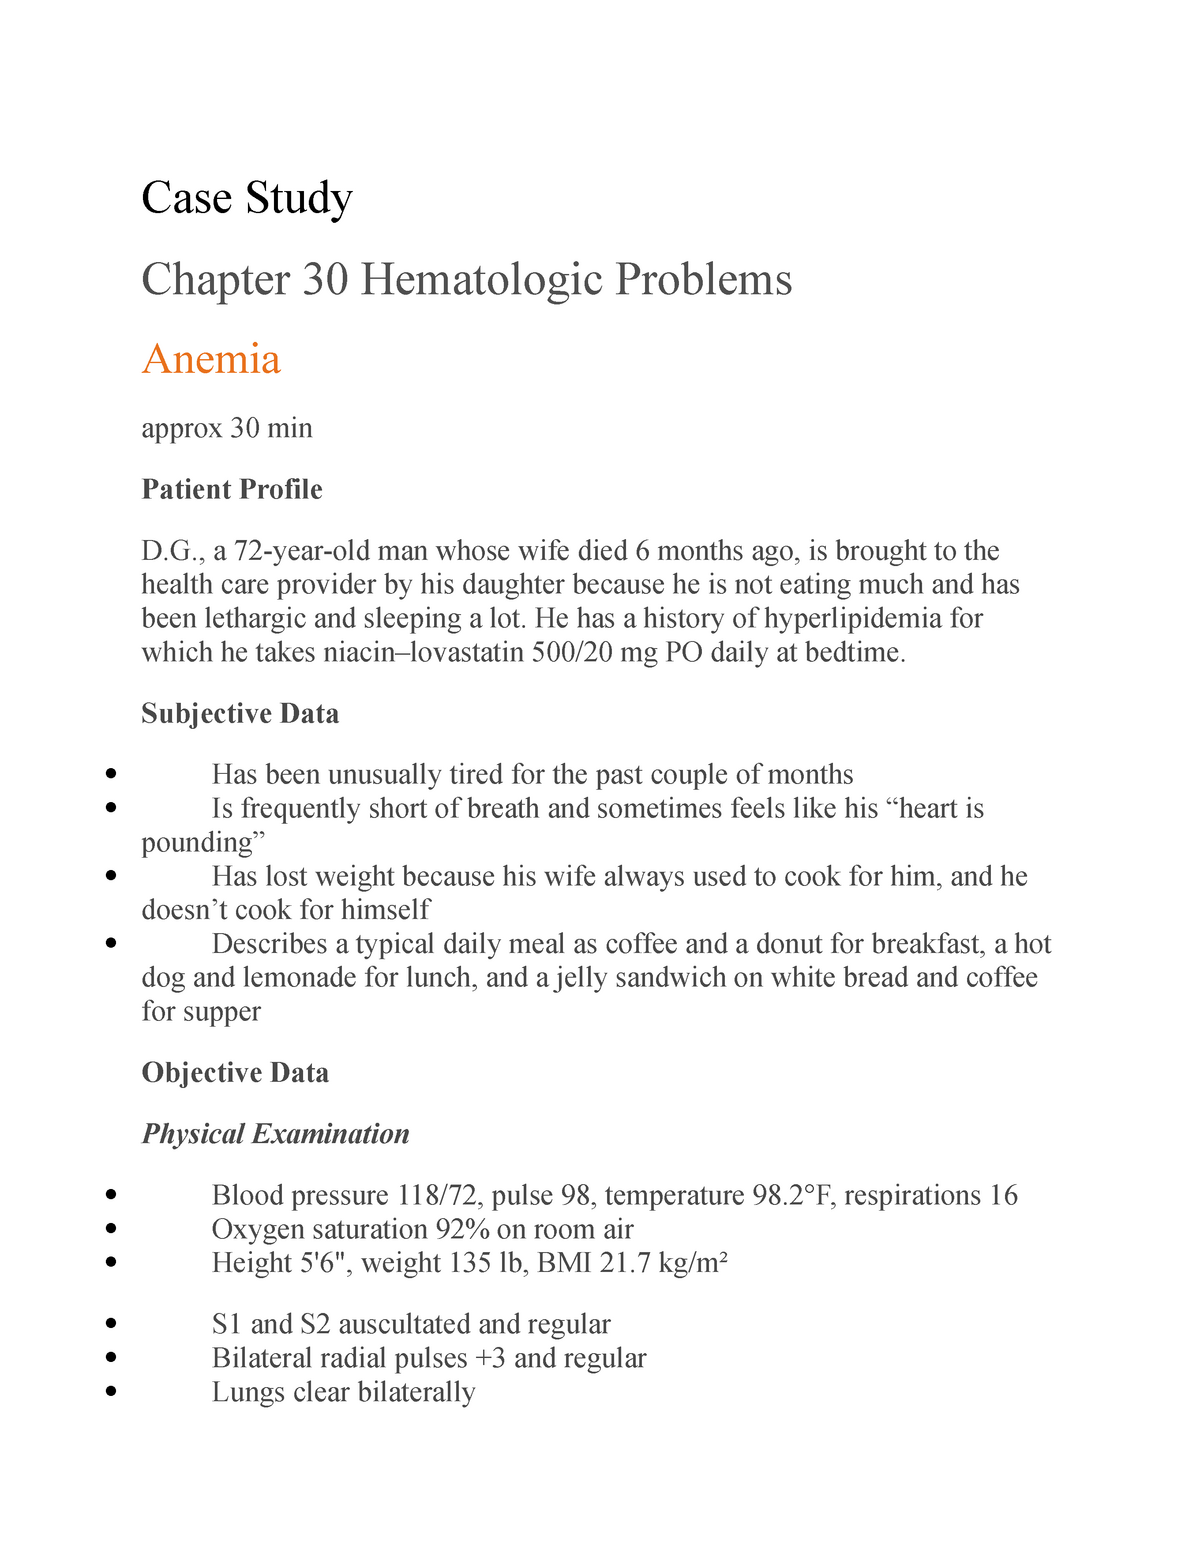 anemia case study with answers